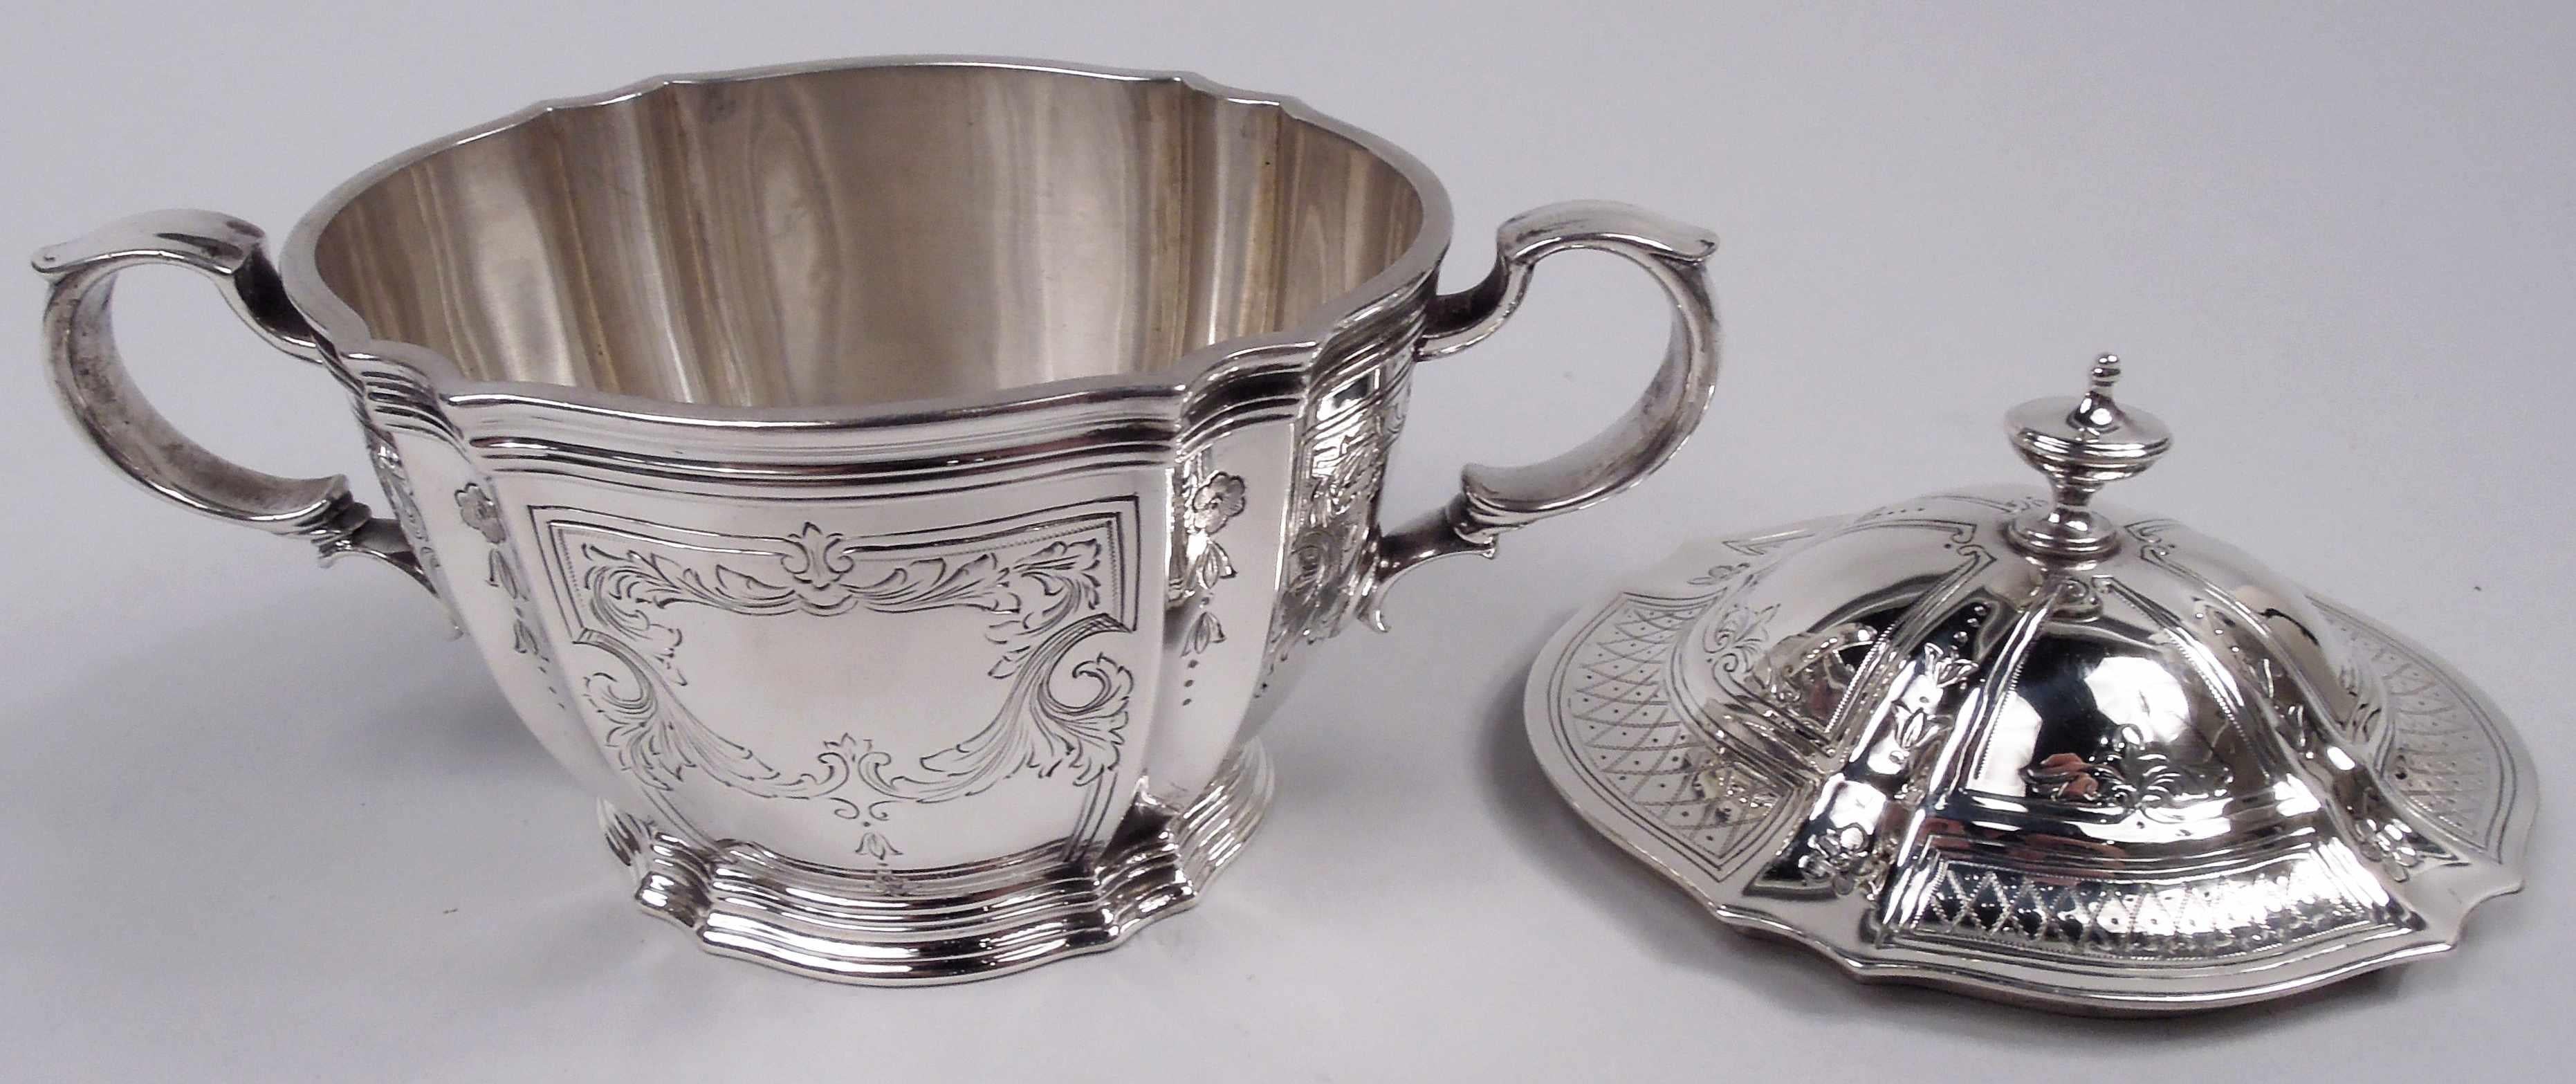 Antique Tiffany Edwardian Classical Sterling Silver Coffee Set on Tray For Sale 5